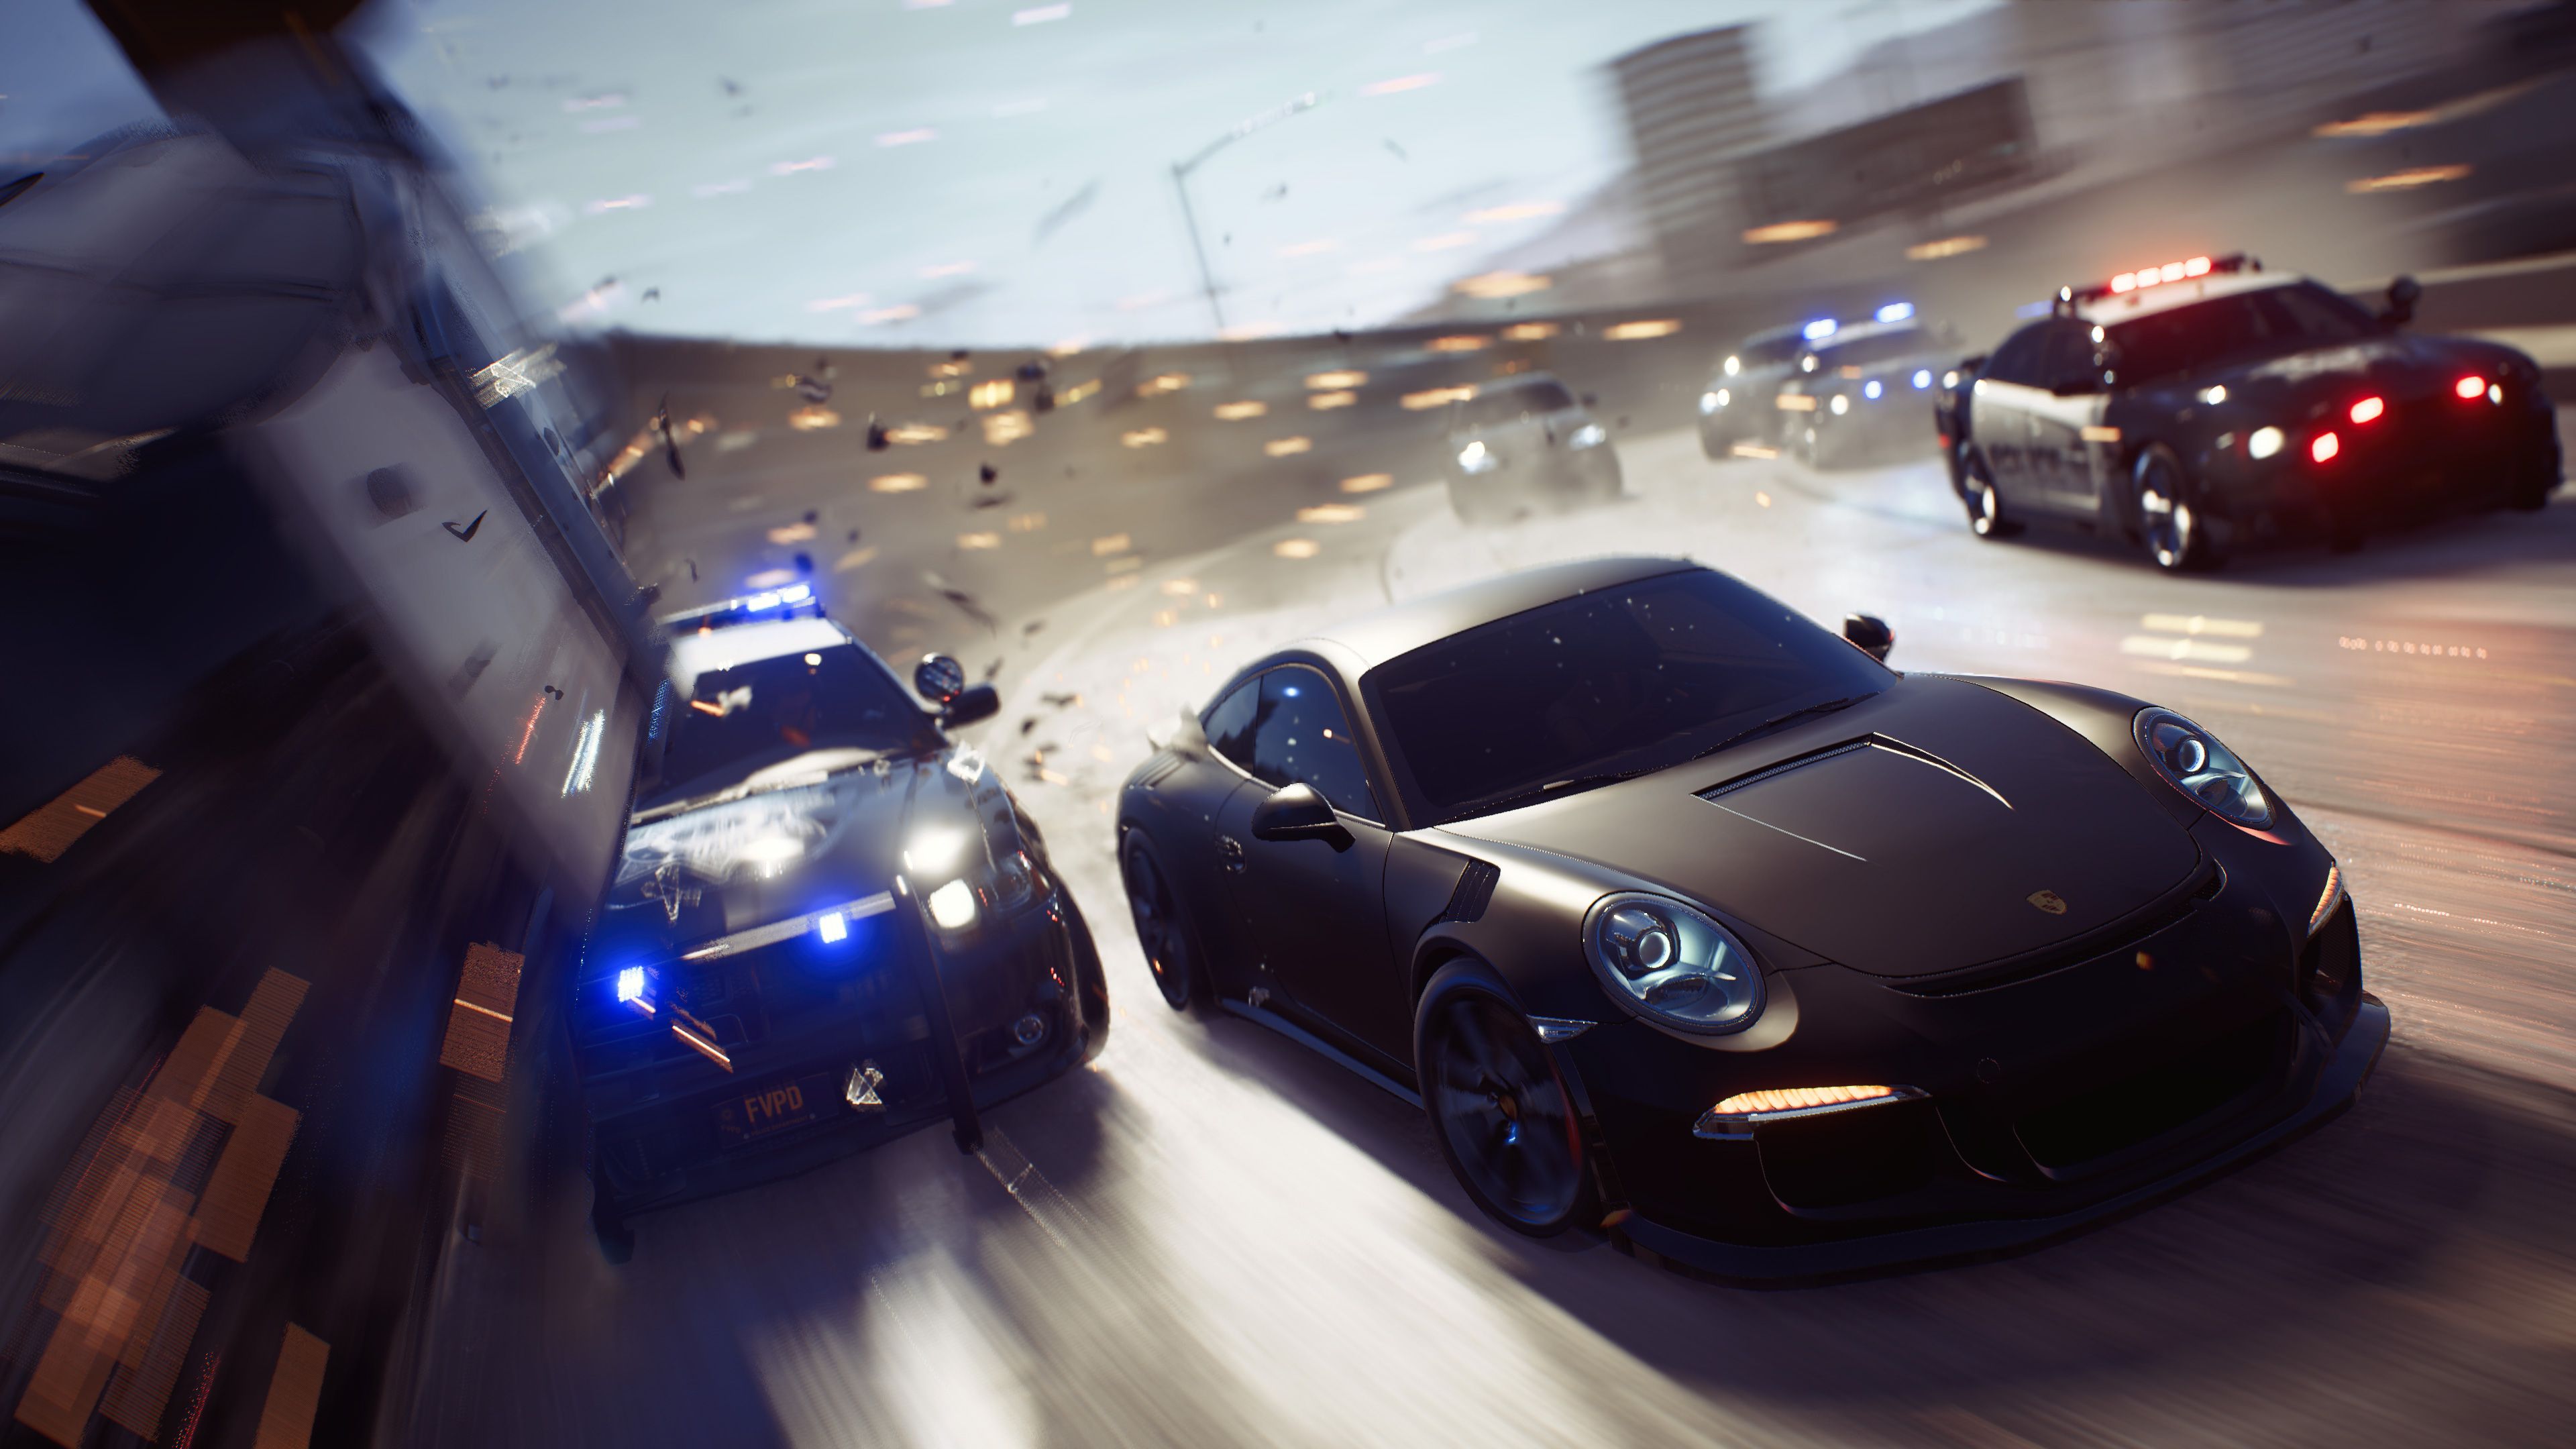 need for speed payback download for pc